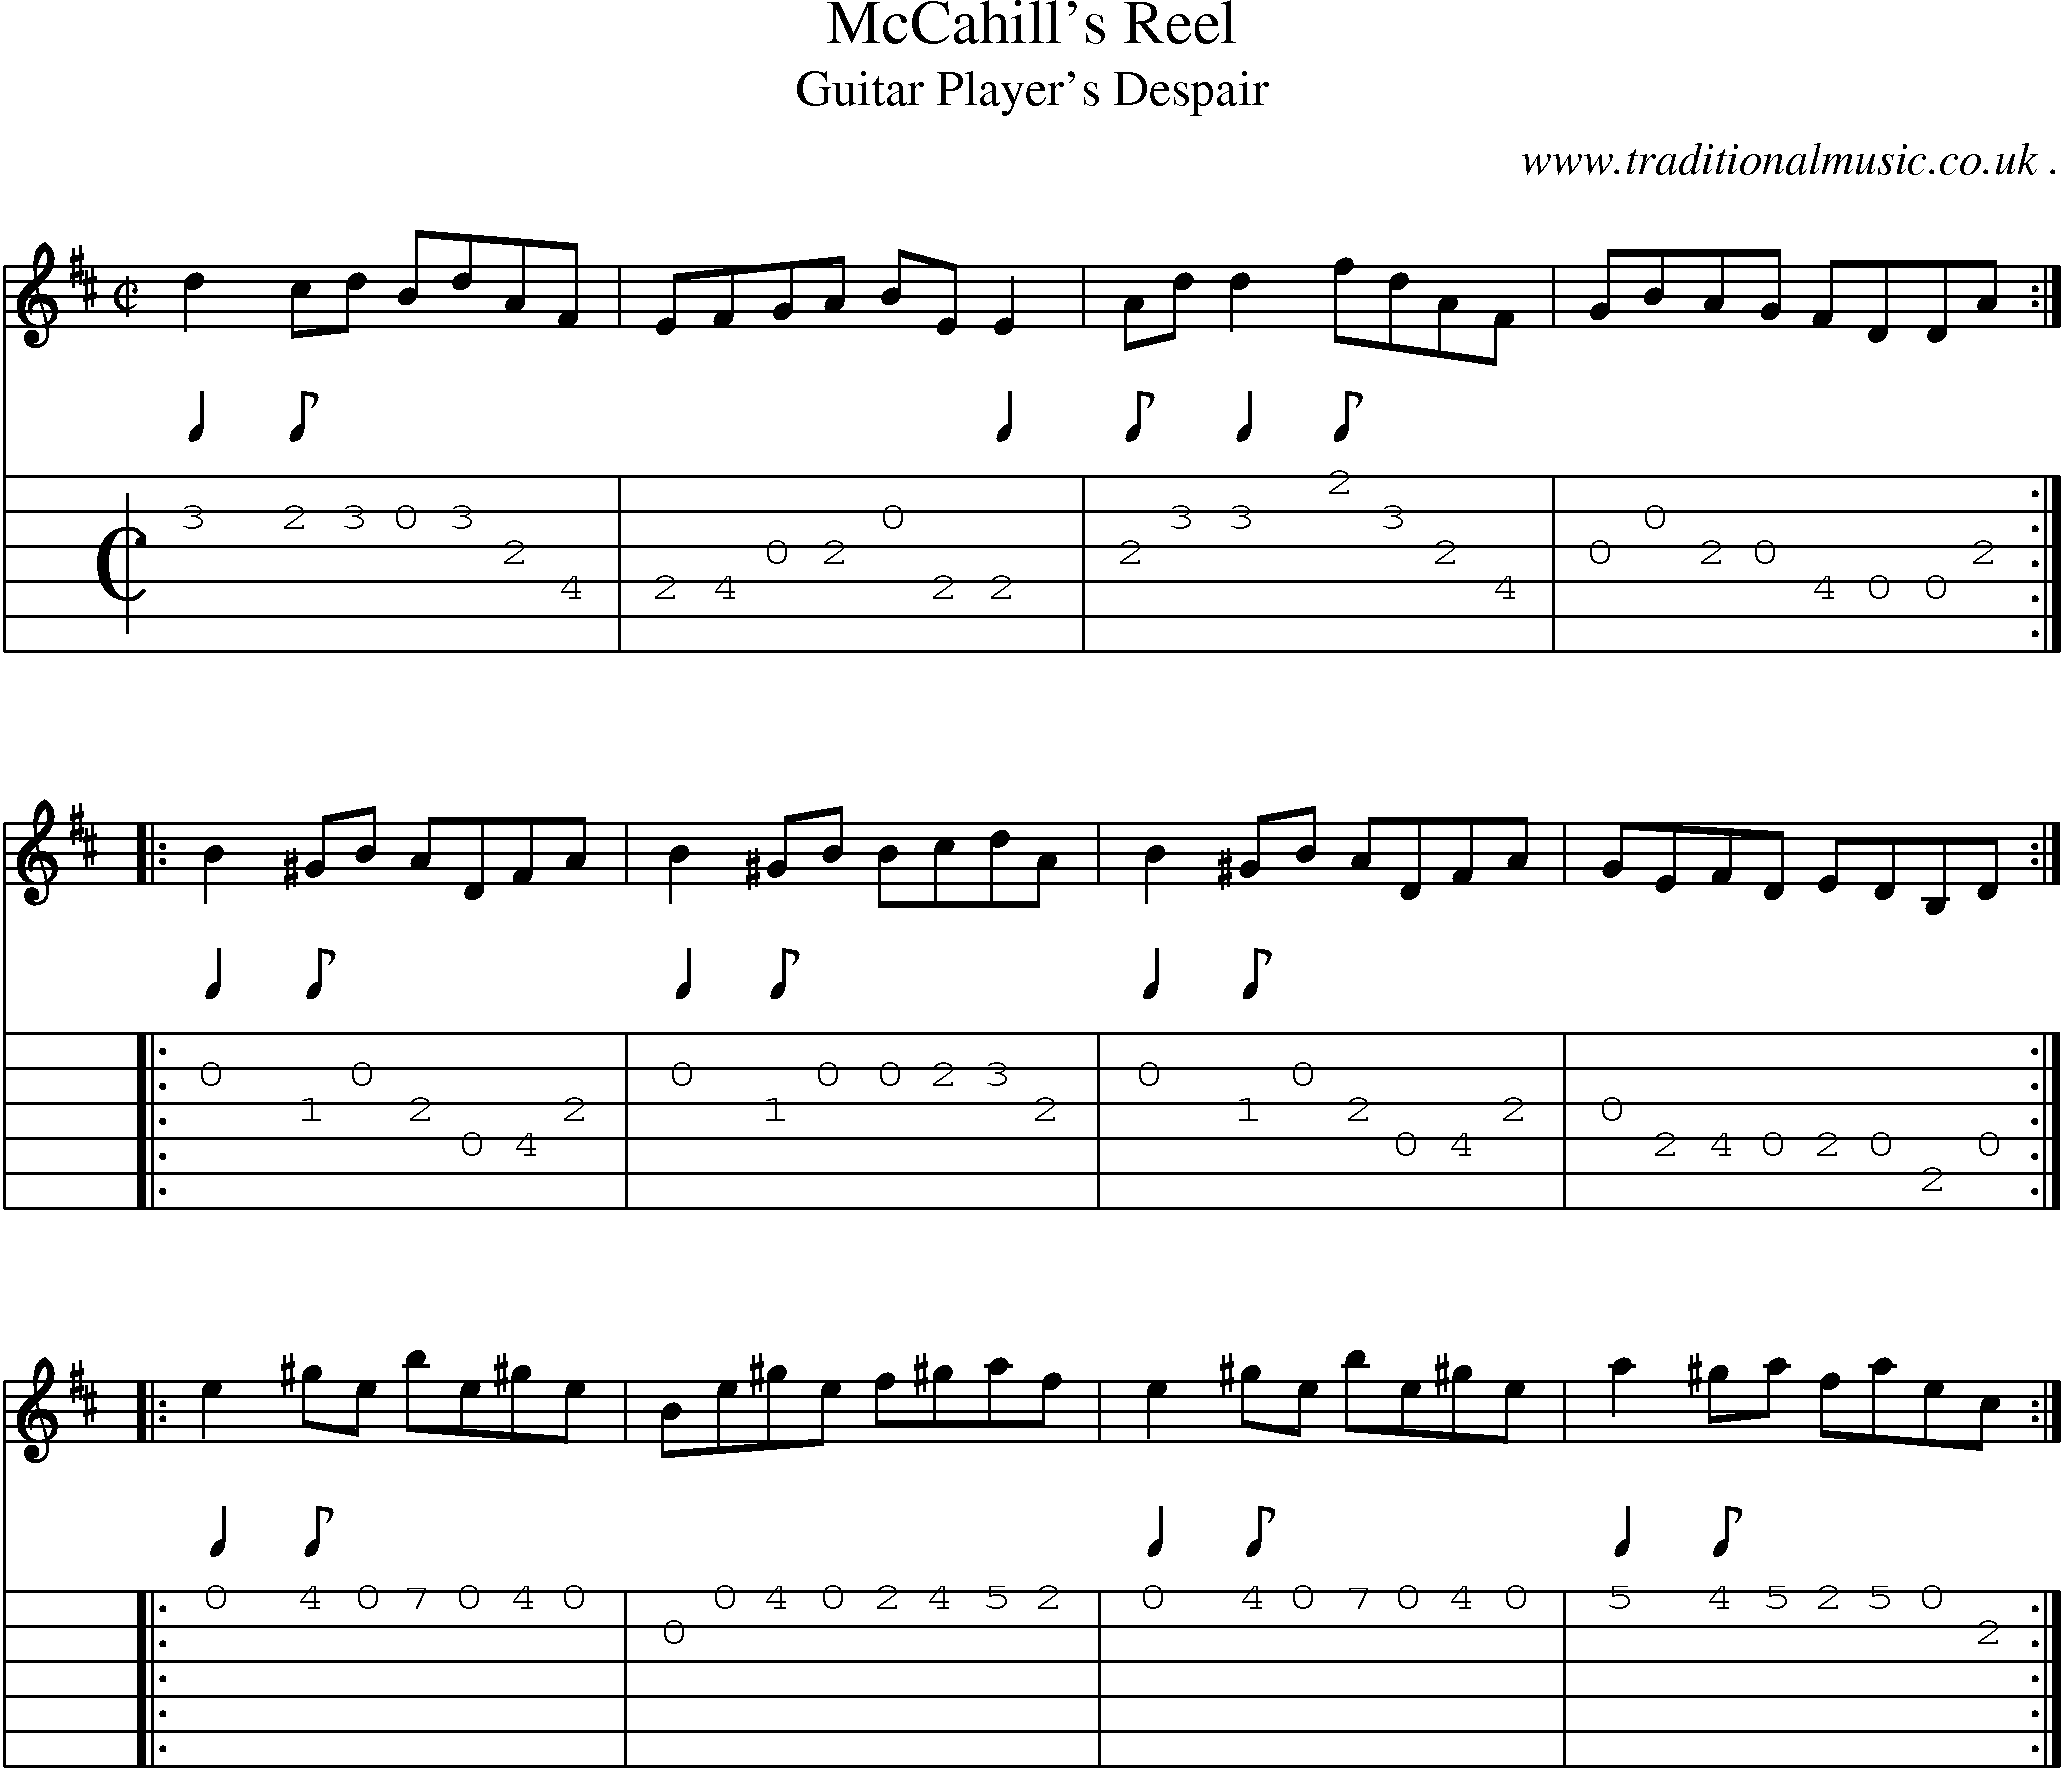 Sheet-Music and Guitar Tabs for Mccahills Reel